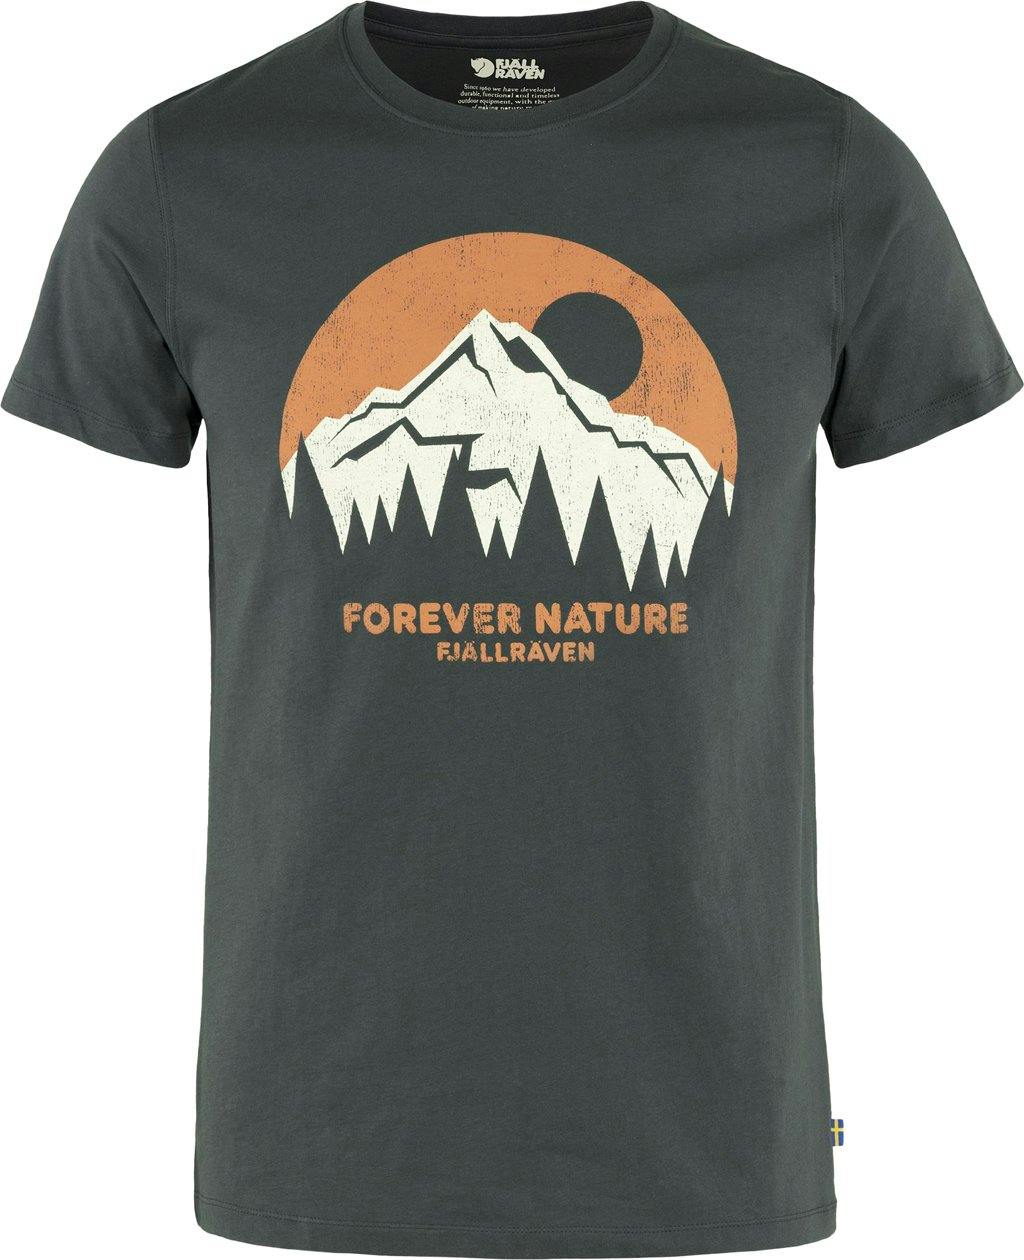 Product image for Nature T-shirt - Men's